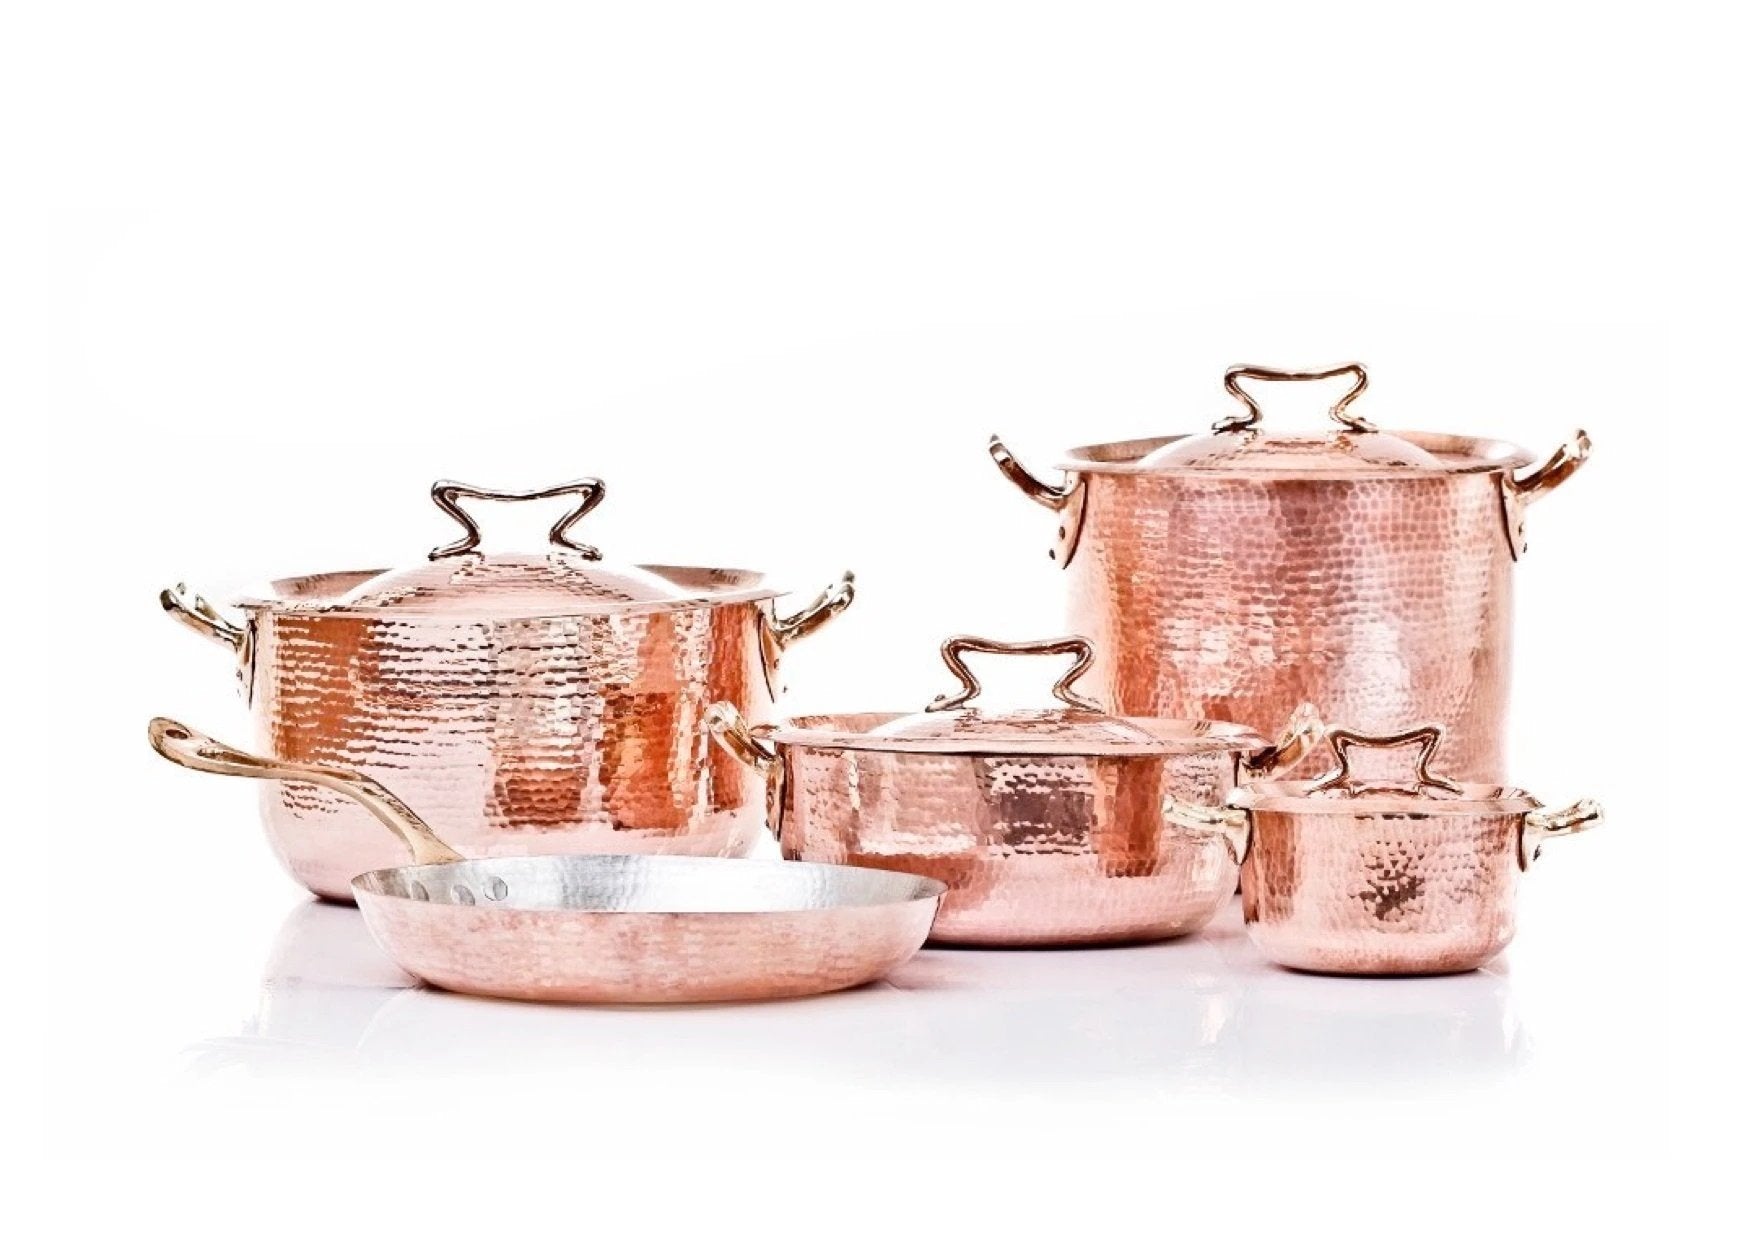 Copper Cookware 9-pcs Set with Standard Lid Cookware Bundles Amoretti Brothers 